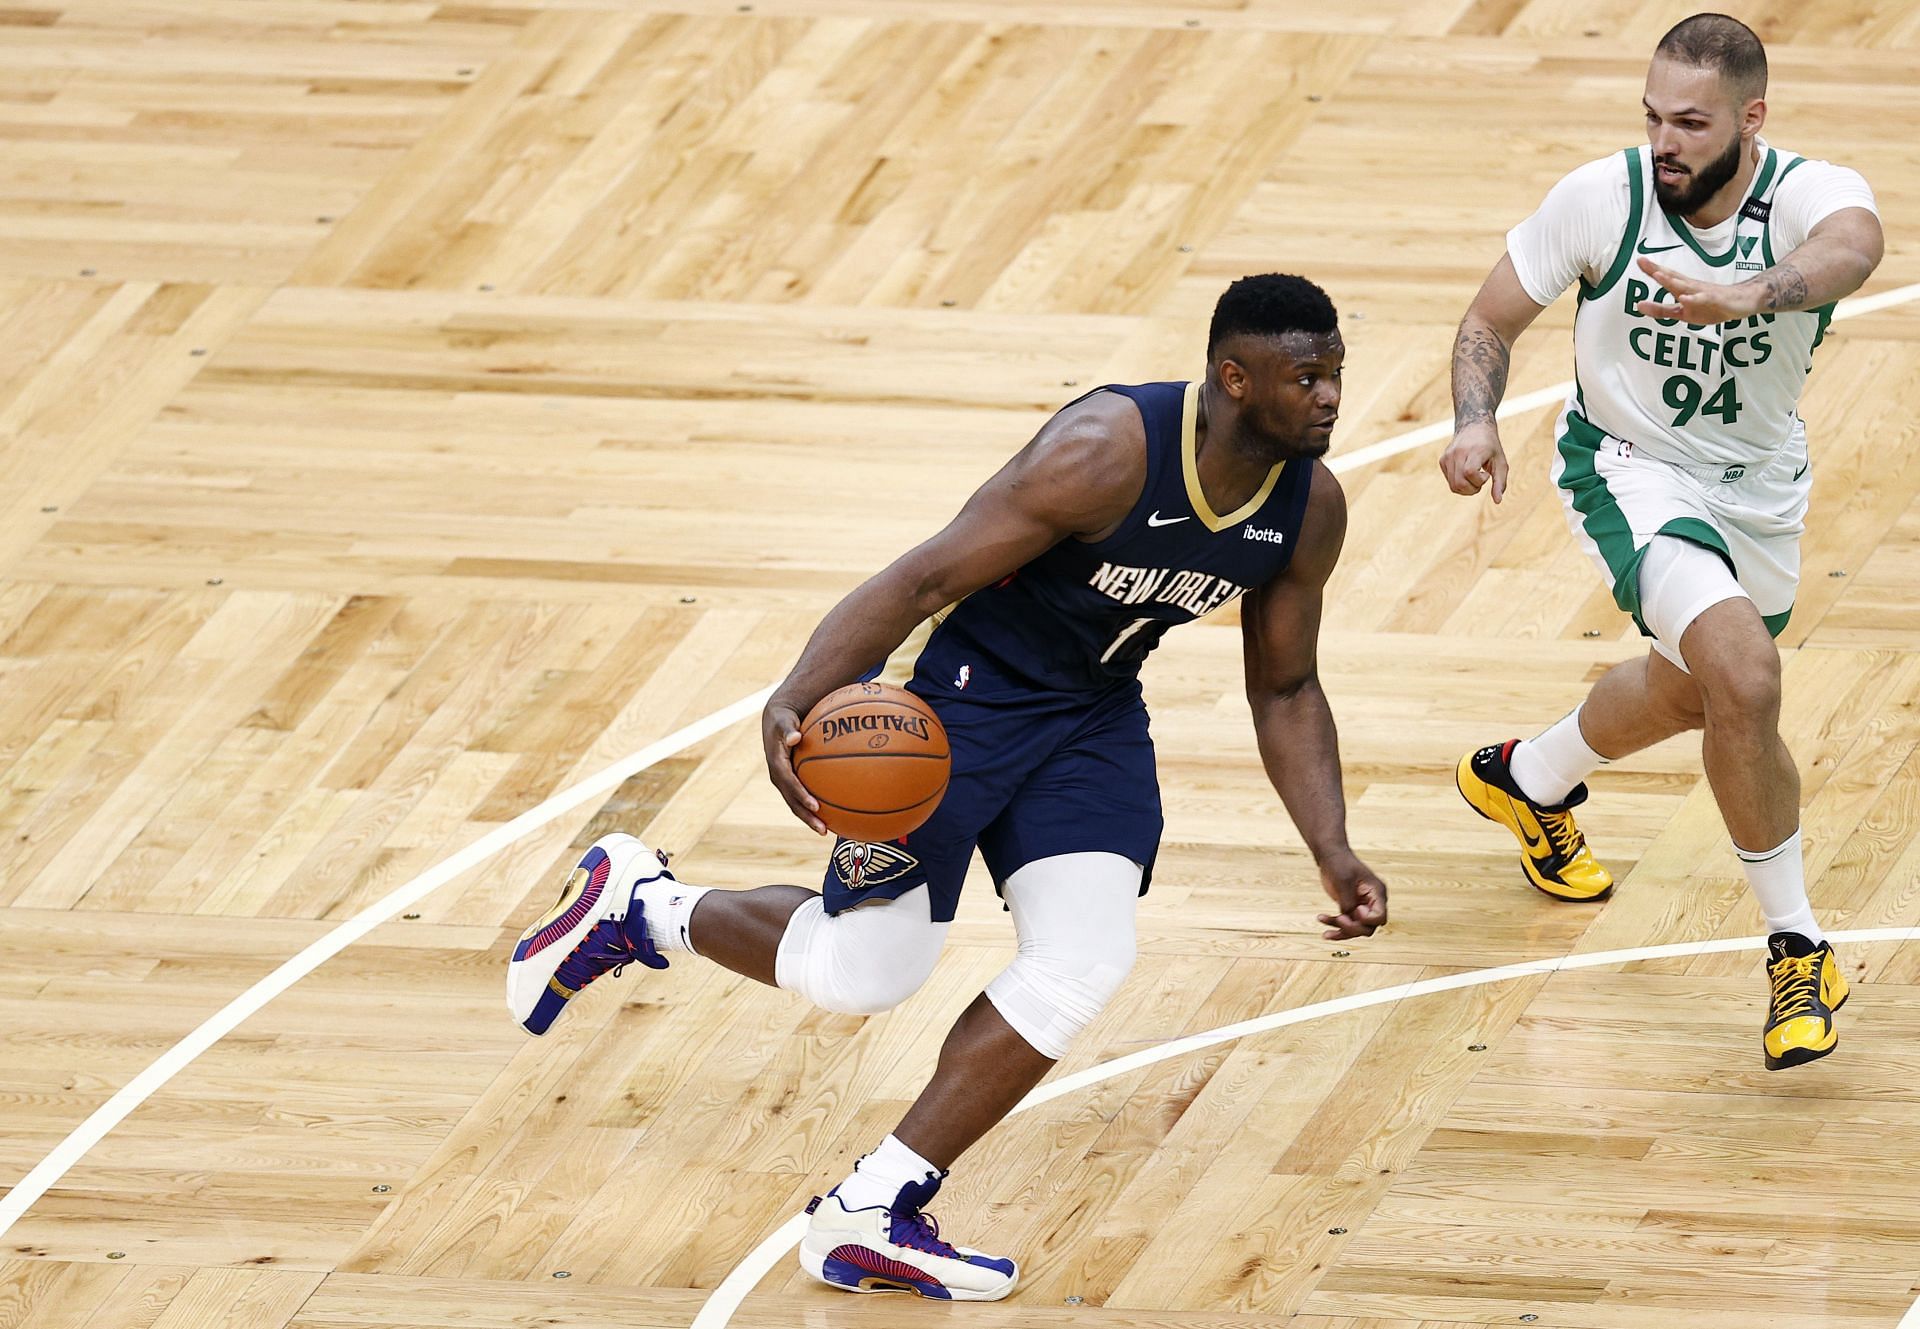 The Boston Celtics will host the New Orleans Pelicans on January 17th.